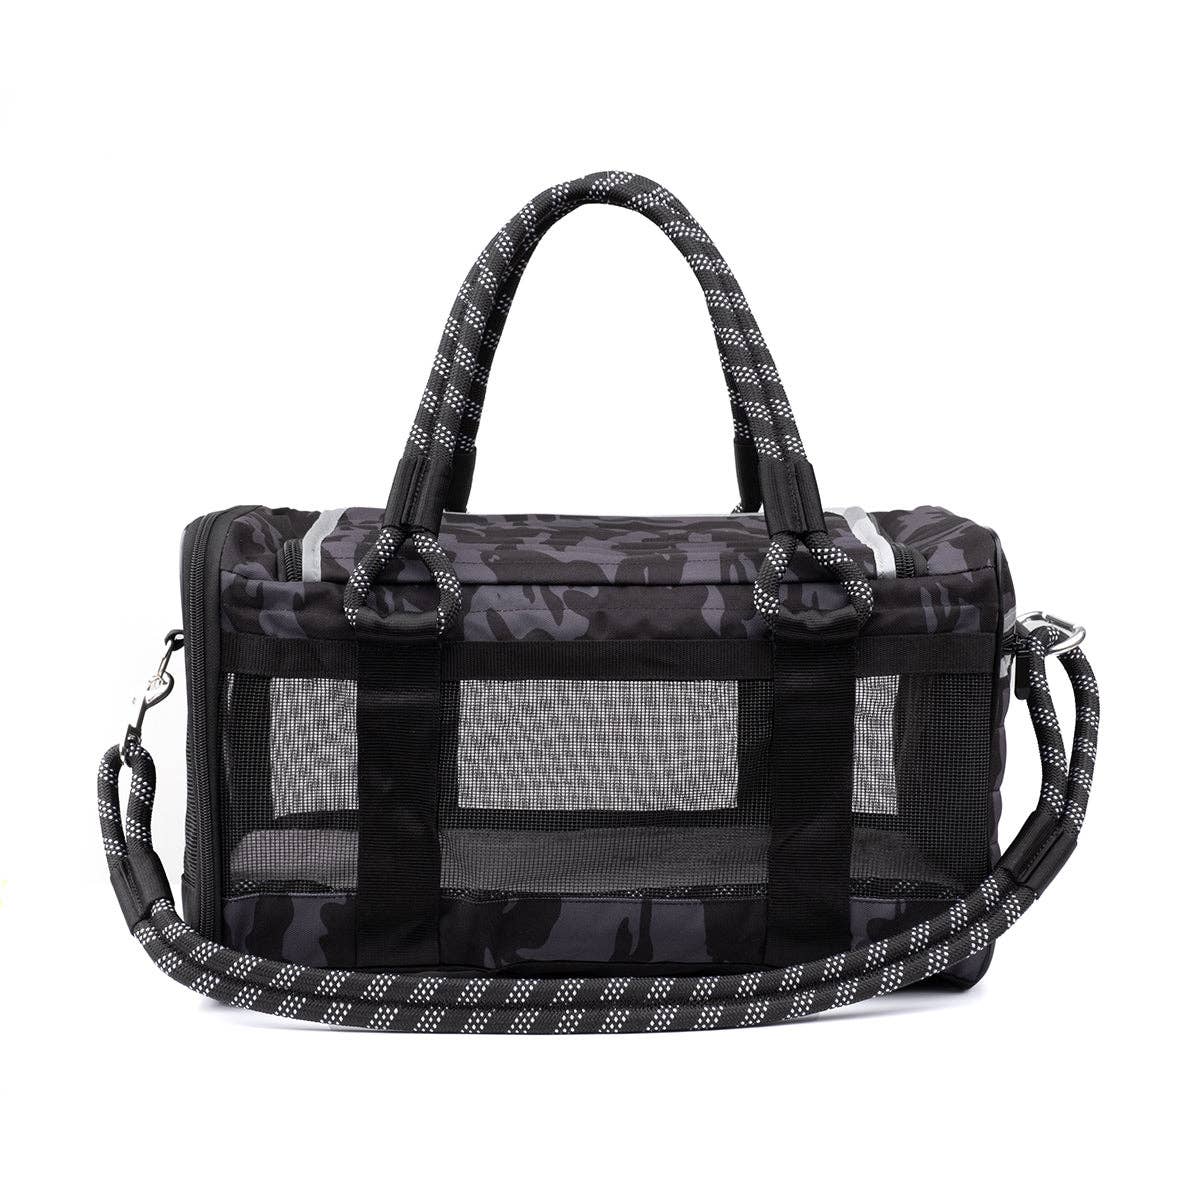 Sherpa Travel Original Deluxe Airline Approved Pet Carrier